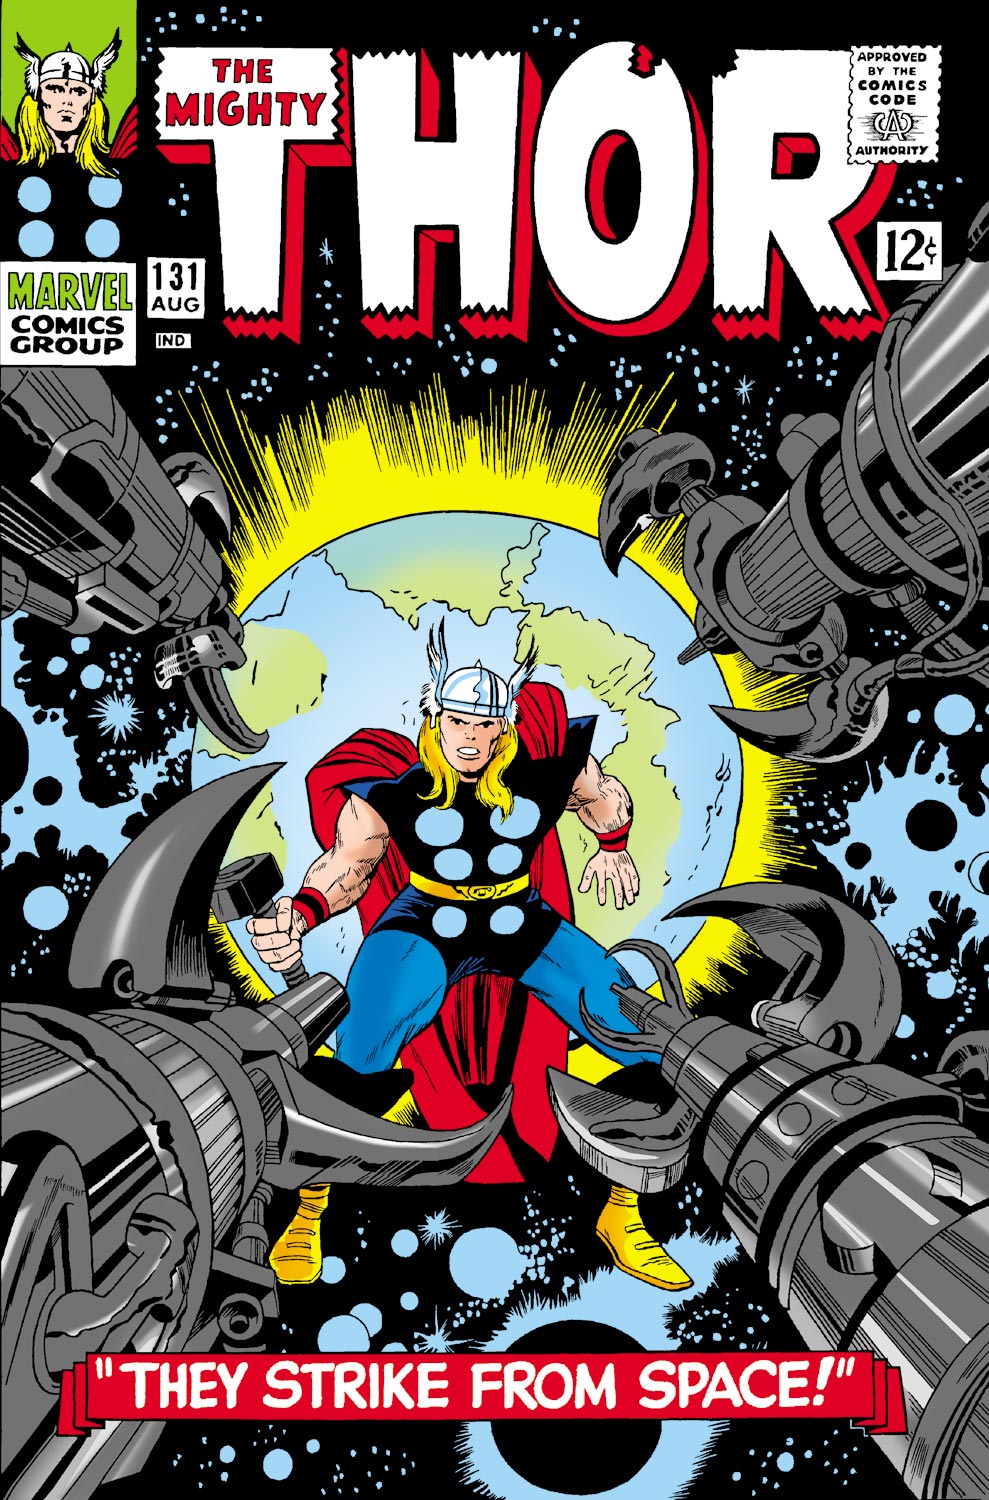 Marvel Masterworks: The Mighty Thor Vol. 5 (Hardcover)